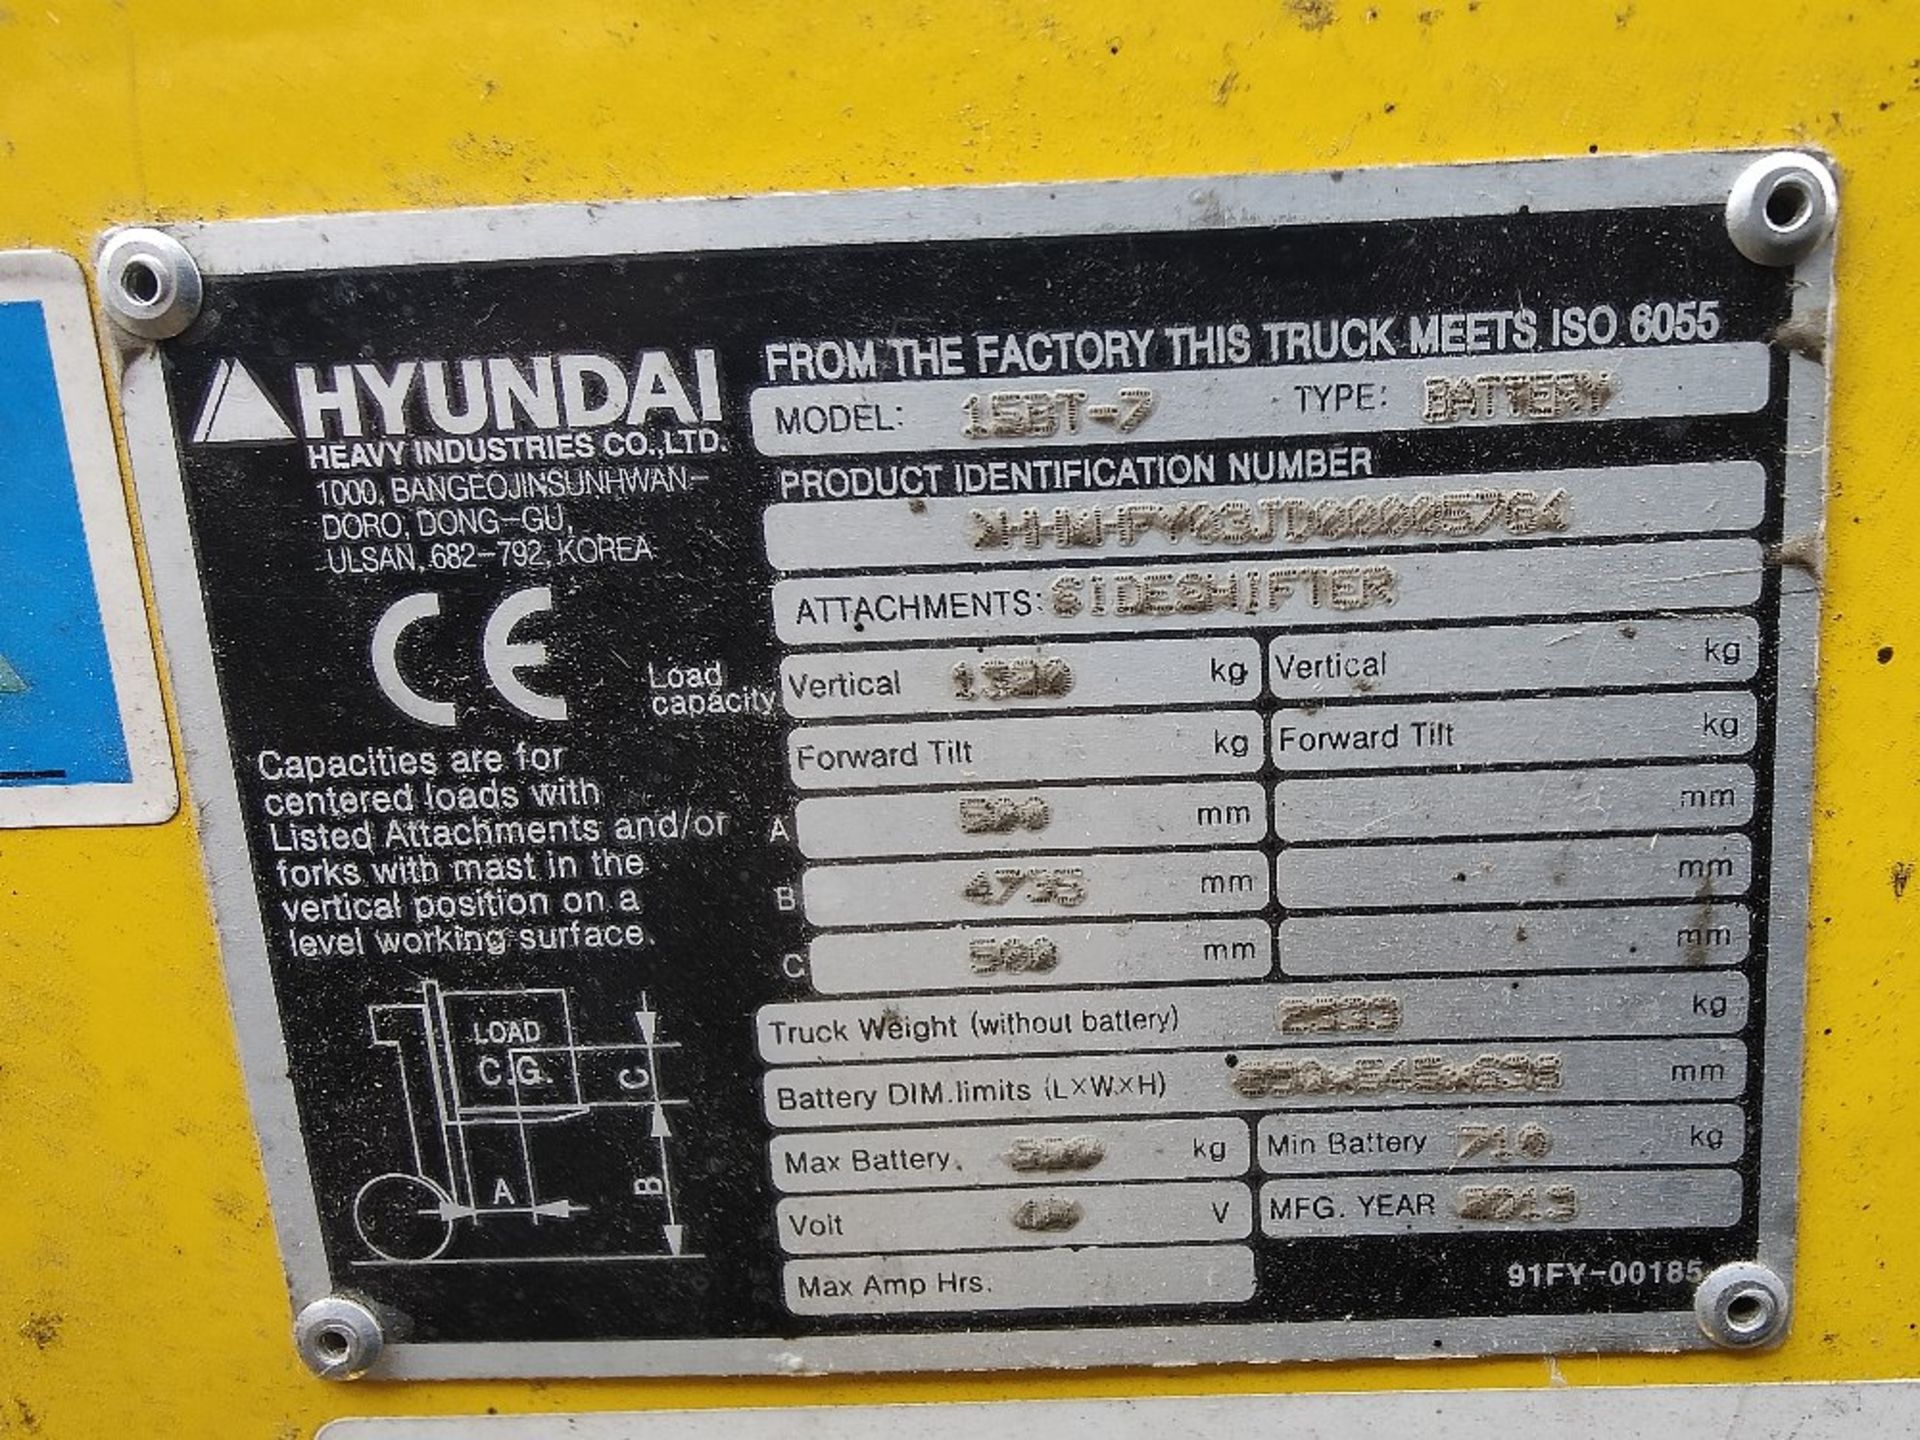 Hyundai 15BT-7 Electric Forklift - Image 11 of 12